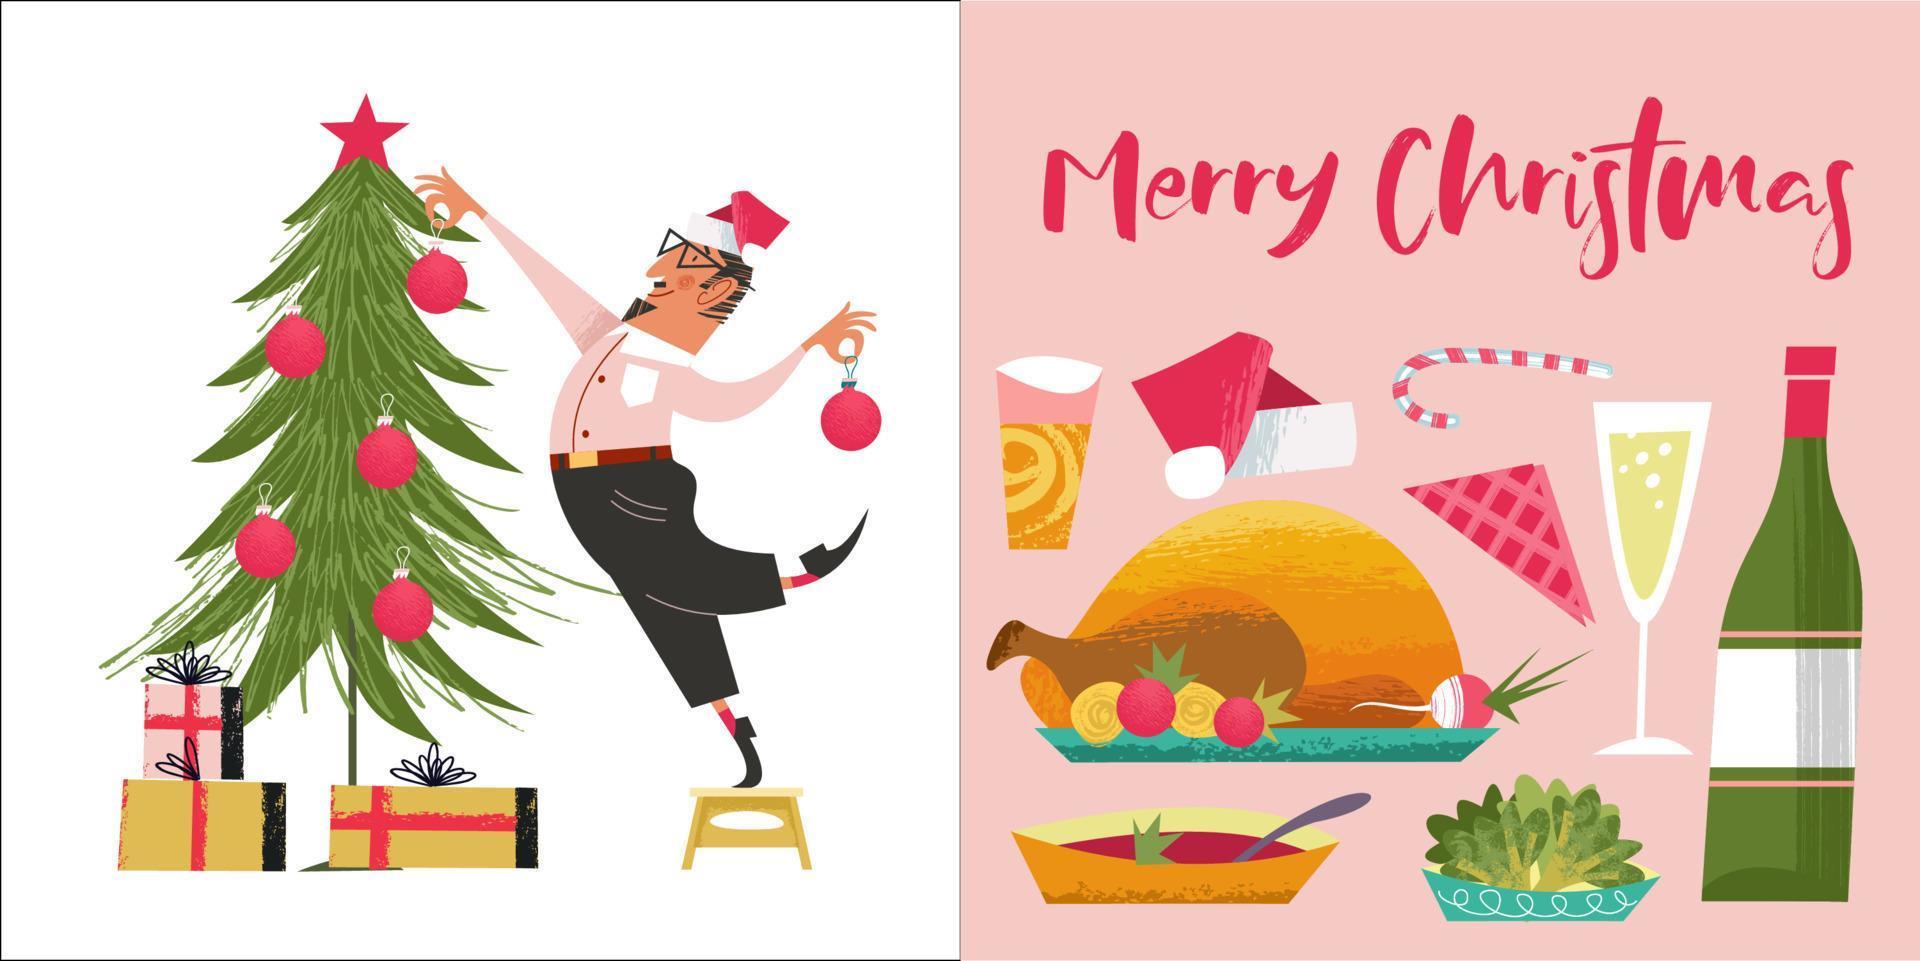 Merry Christmas. A man in a Santa hat decorates the Christmas tree. Vector illustration, set of Christmas decorations and festive food.